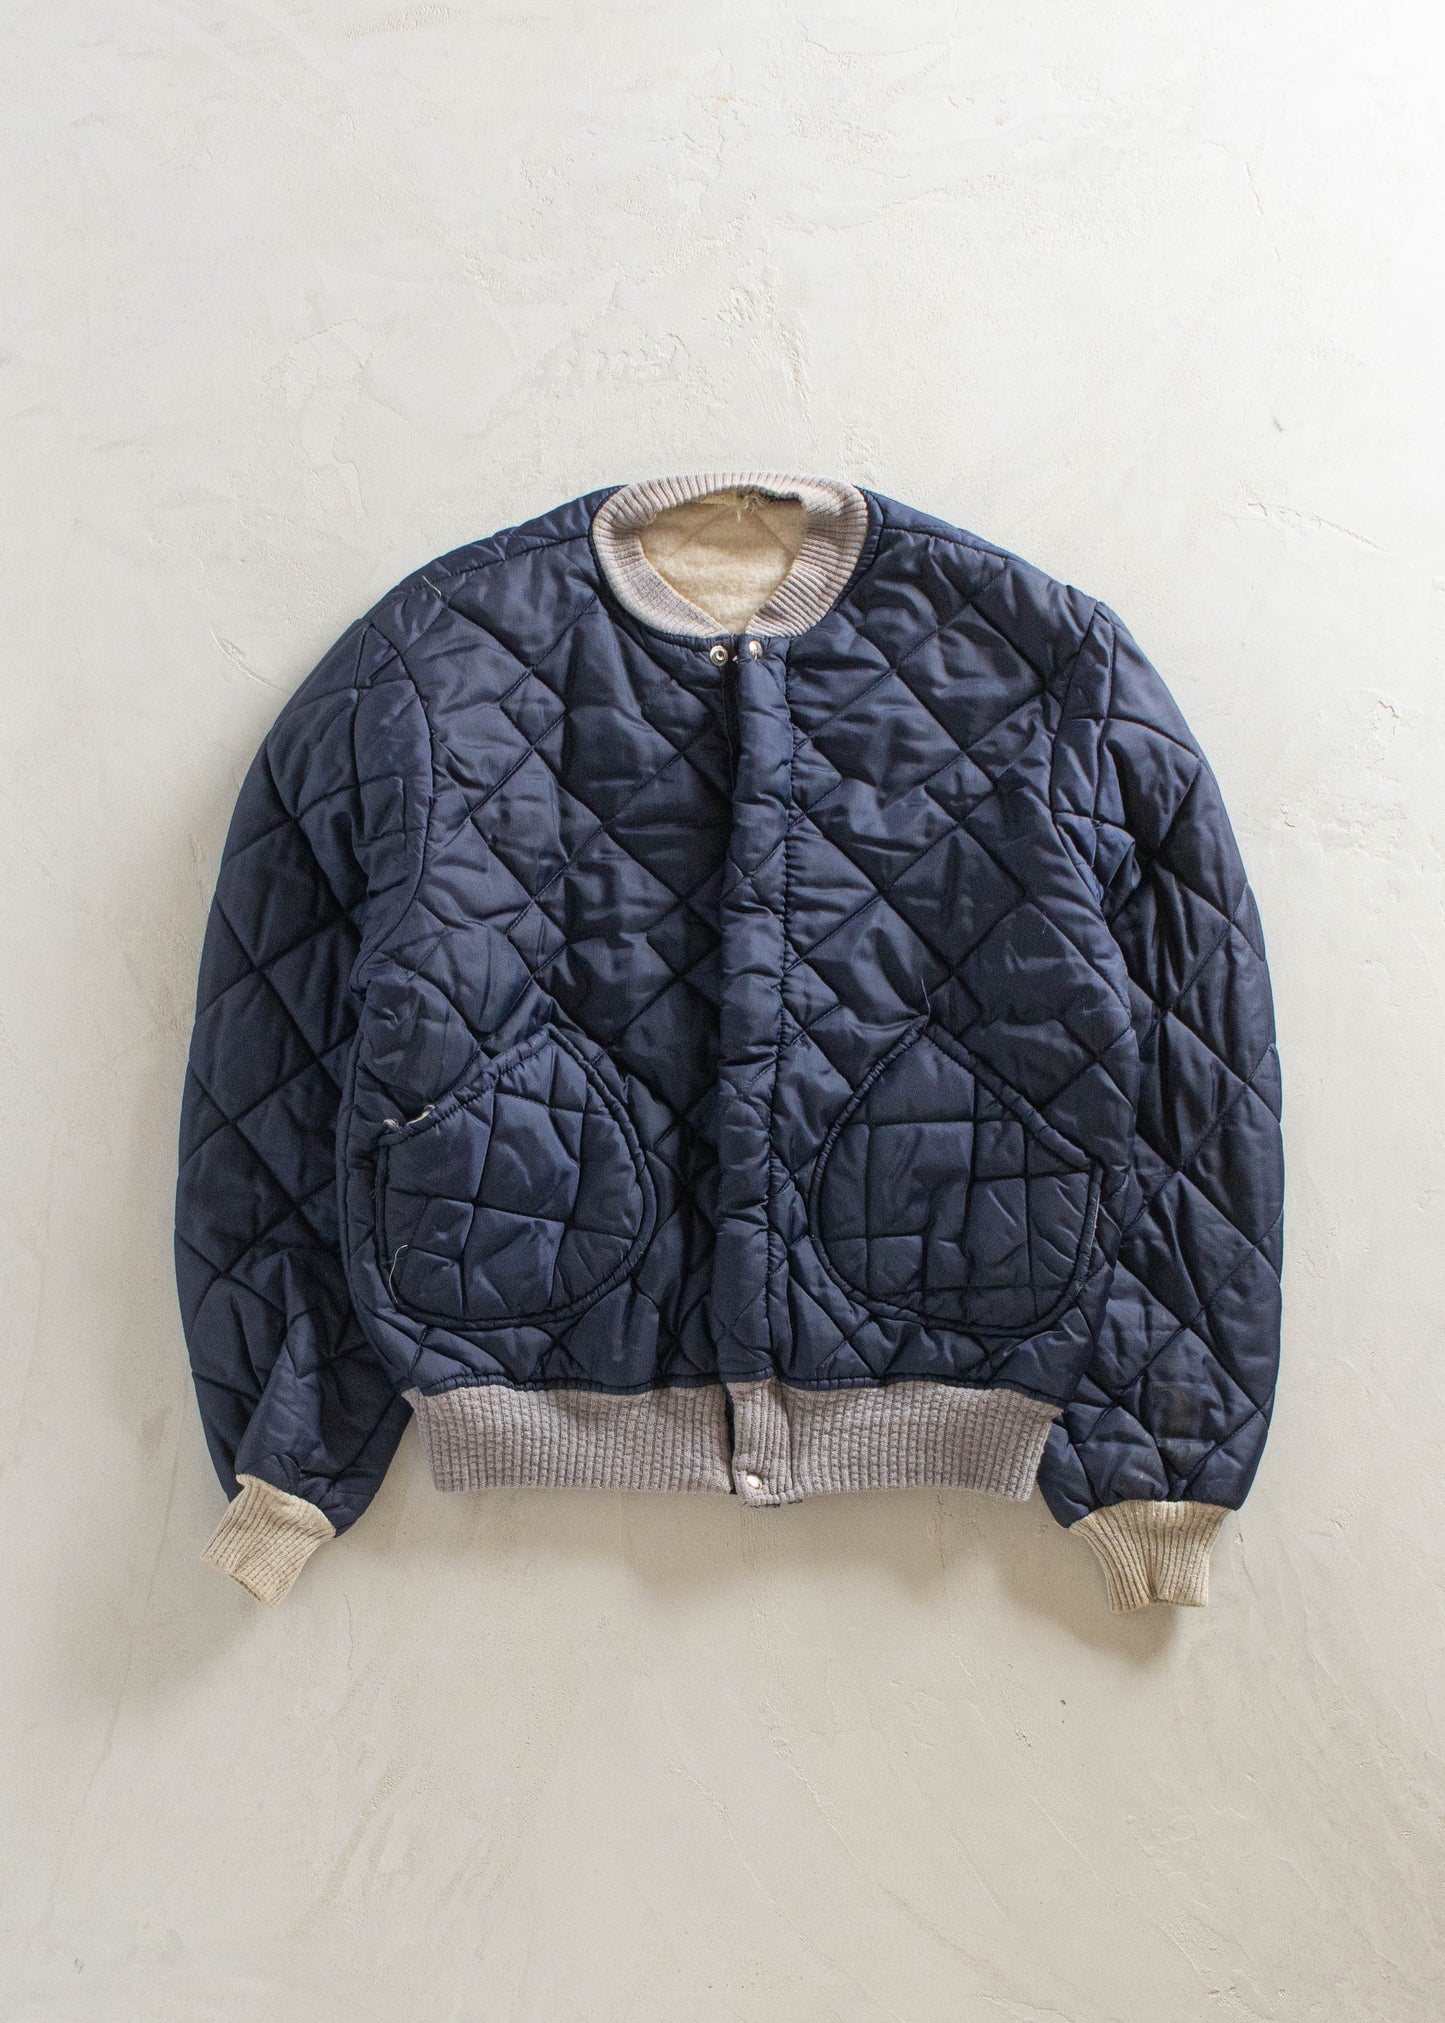 1980s Quilted Nylon Jacket Size S/M